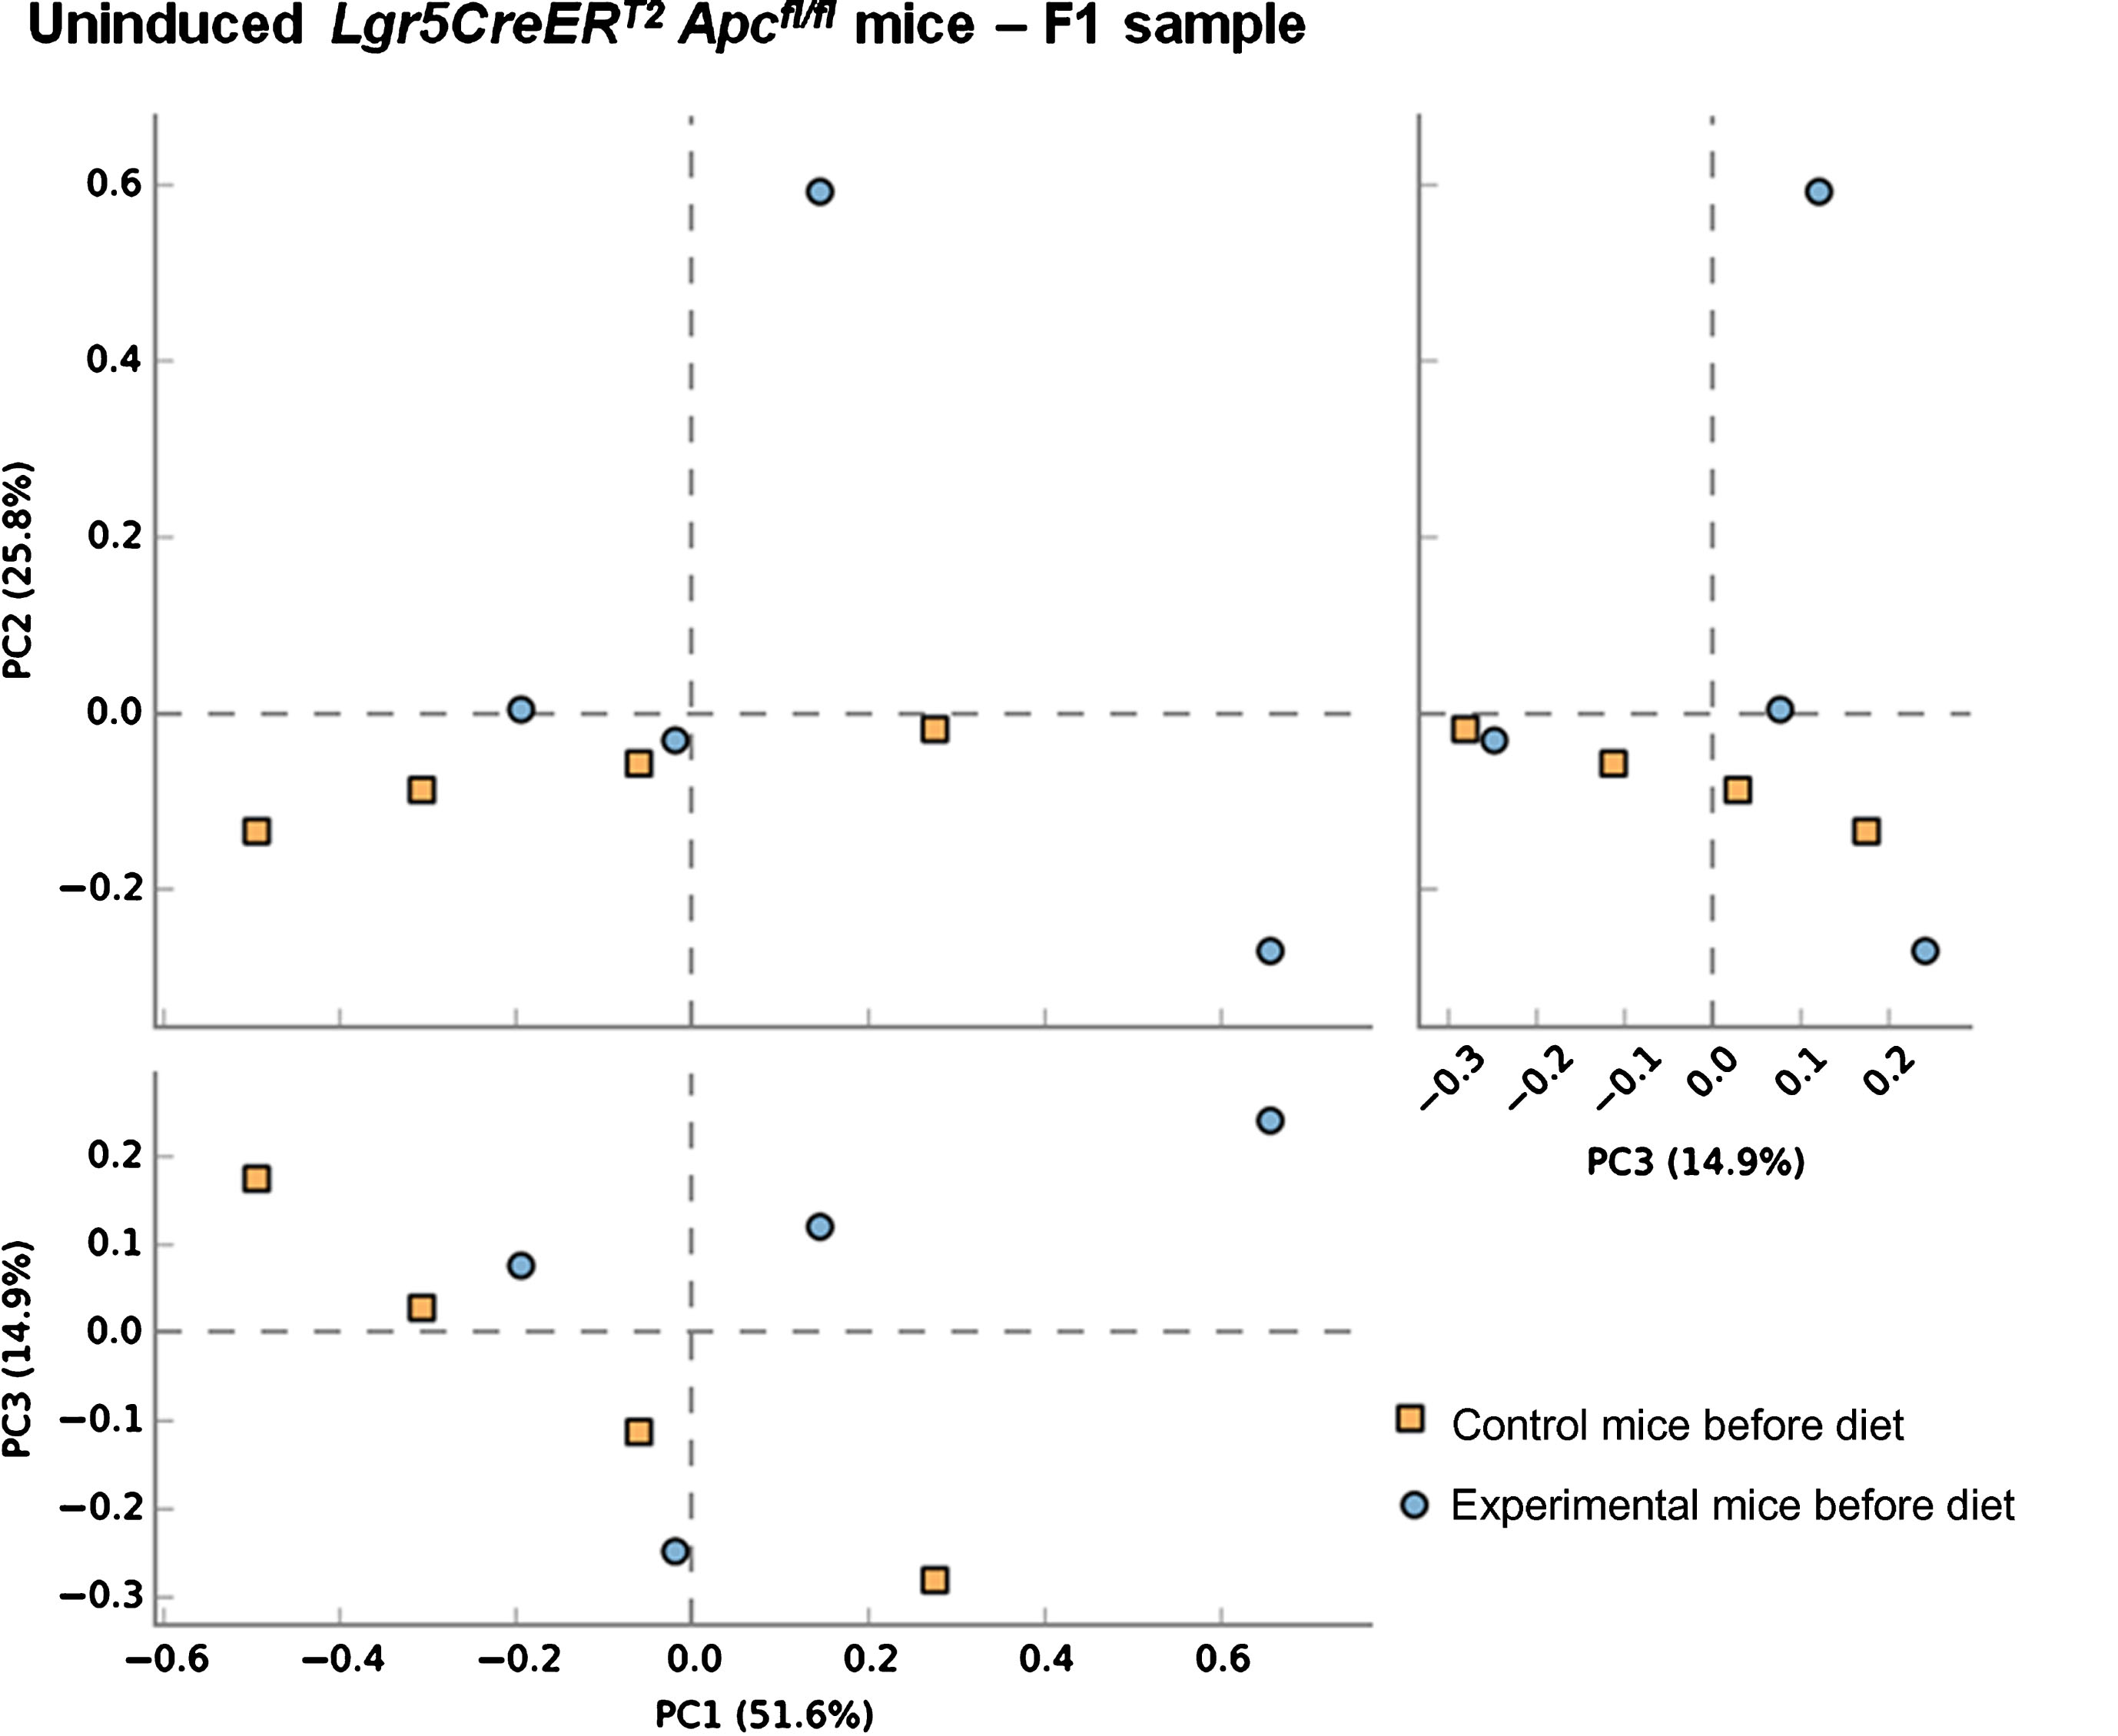 Composition of the gut microbiota of communities are equivalent prior to BRB dietary modification. A principal co-ordinate analysis (PCA) of unweighted unifrac distances indicating no clear separation of the microbial communities’ present in each animal. This result was supported by PERMANOVA analysis in R. Faecal samples of 4 uninduced control Lgr5CreERT2 Apcfl/fl () and 4 uninduced experimental Lgr5CreERT2Apcfl/fl () mice taken at the F1 sampling point (prior to commencement of BRB dietary modification).